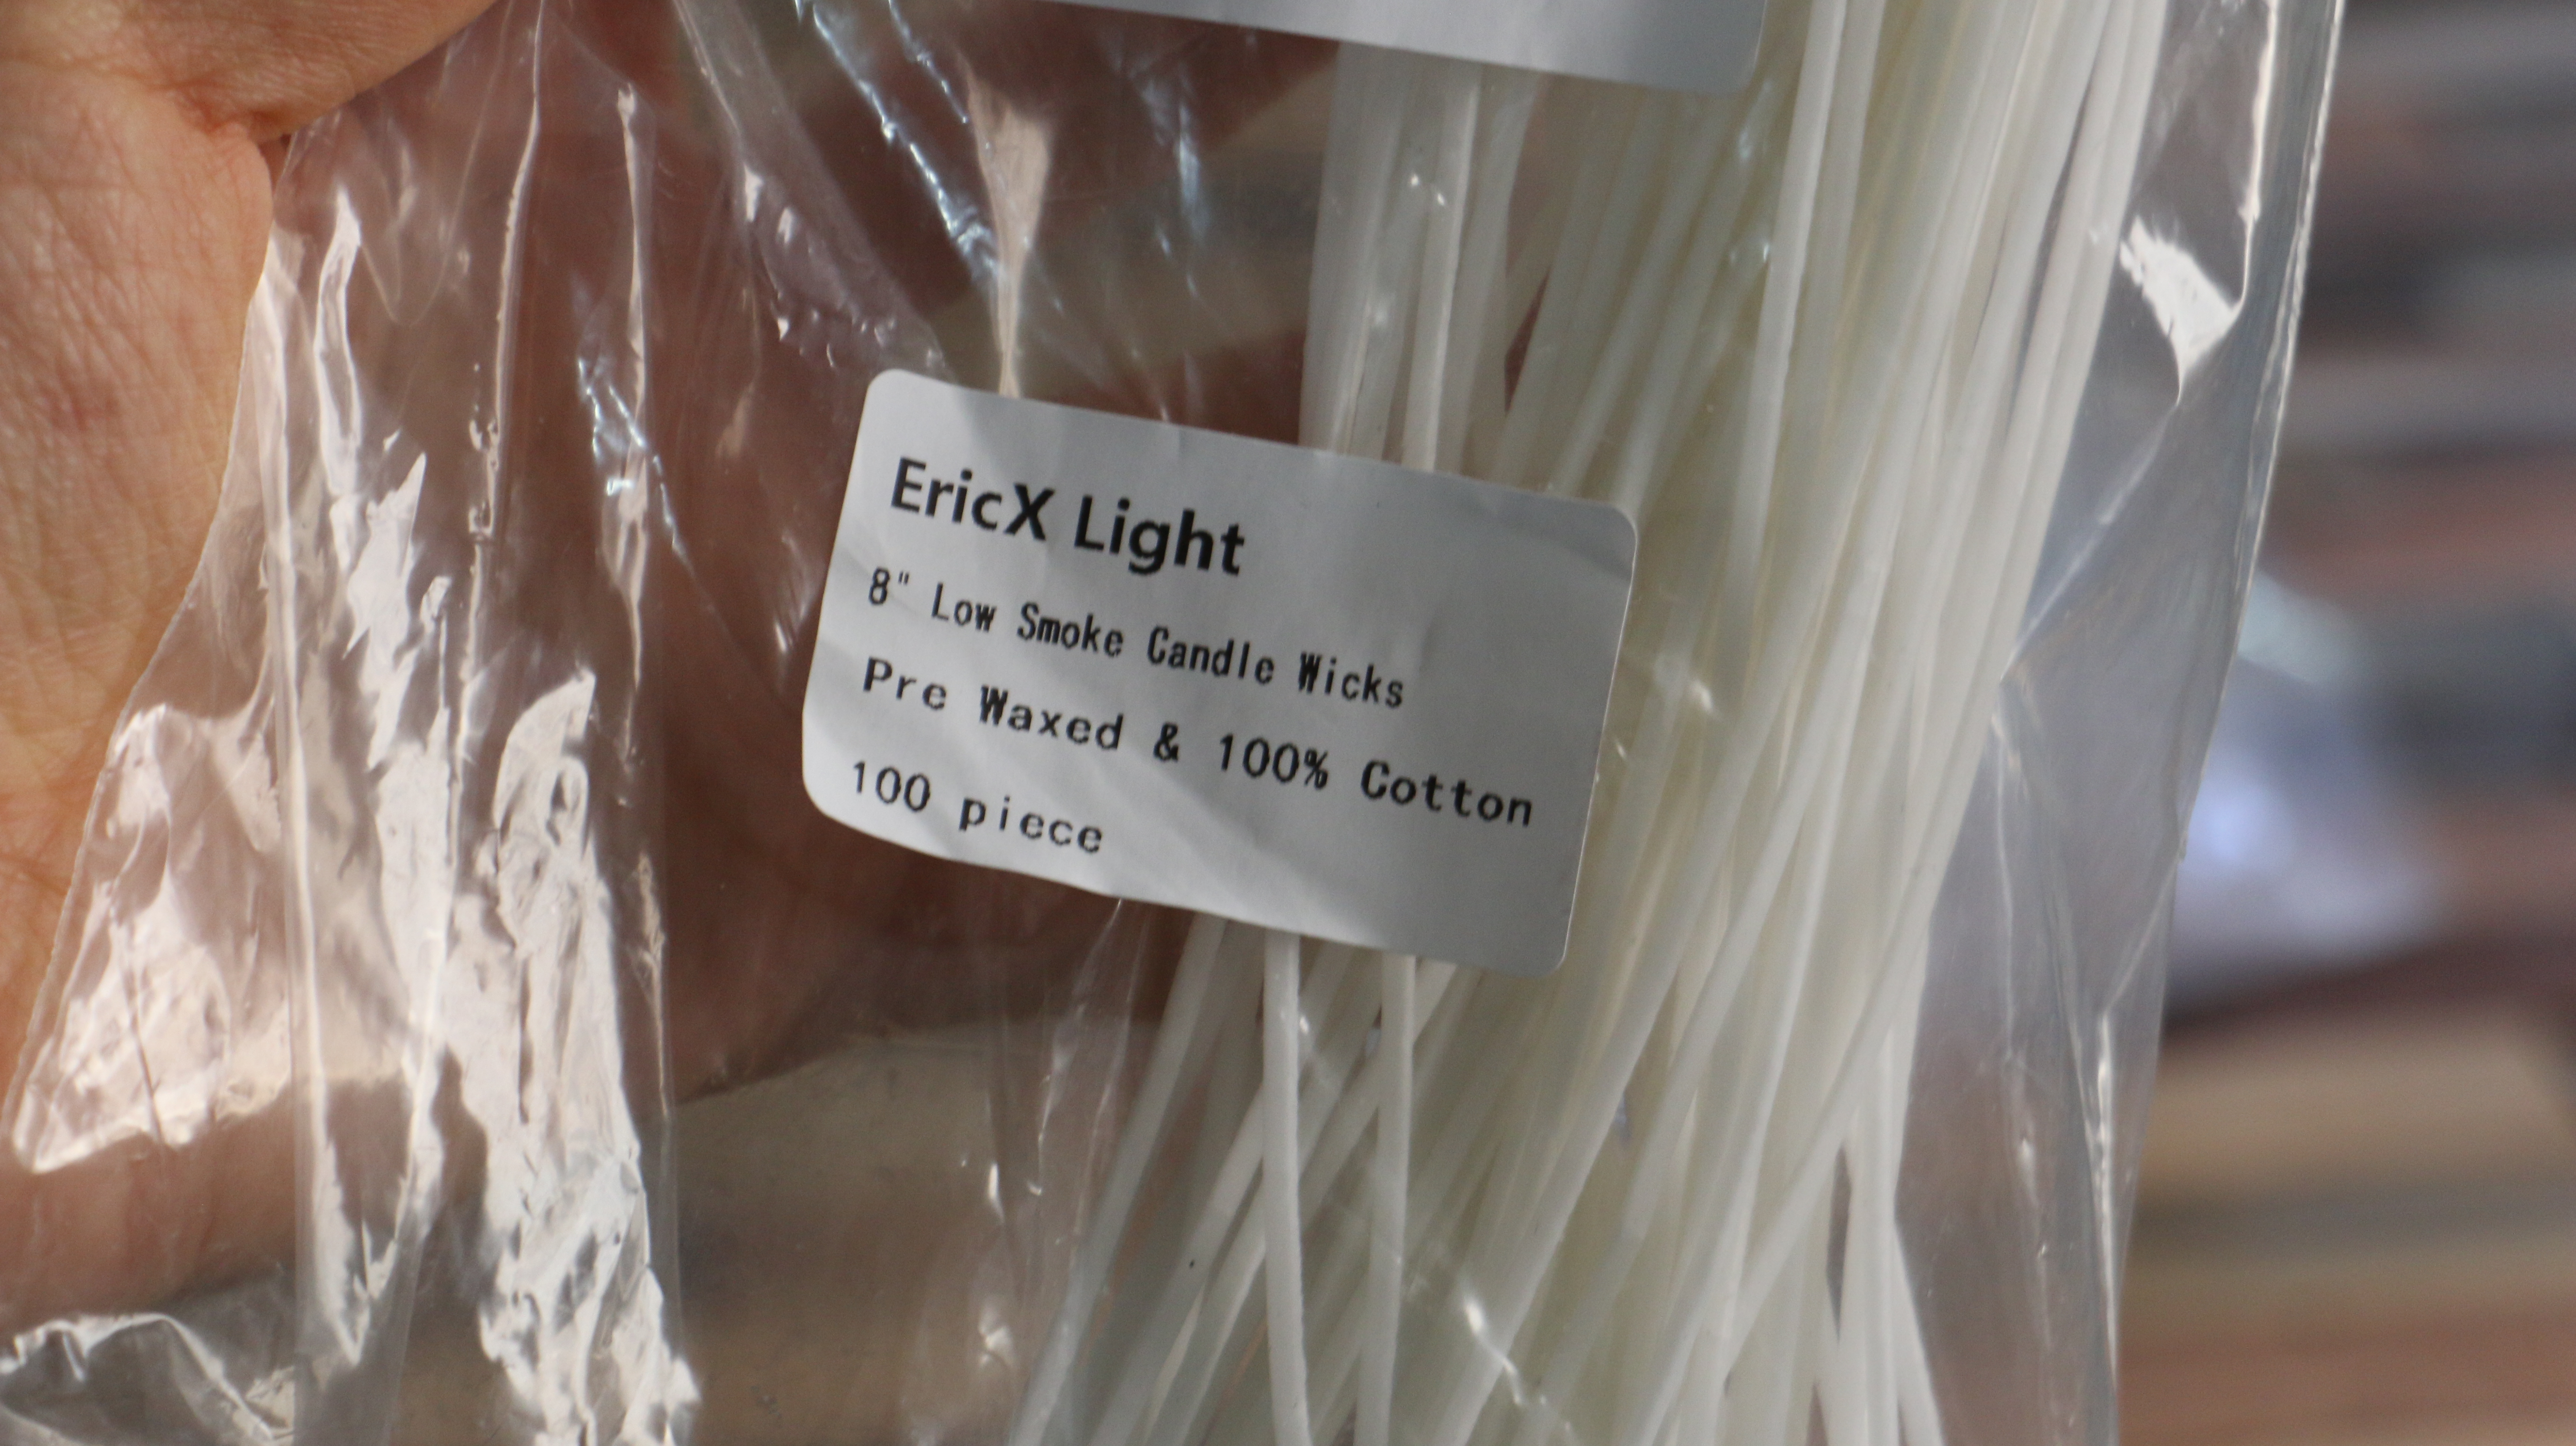 EricX Light 100 6 Inch Pre-Waxed Cotton Candle Wicks for Candle Making